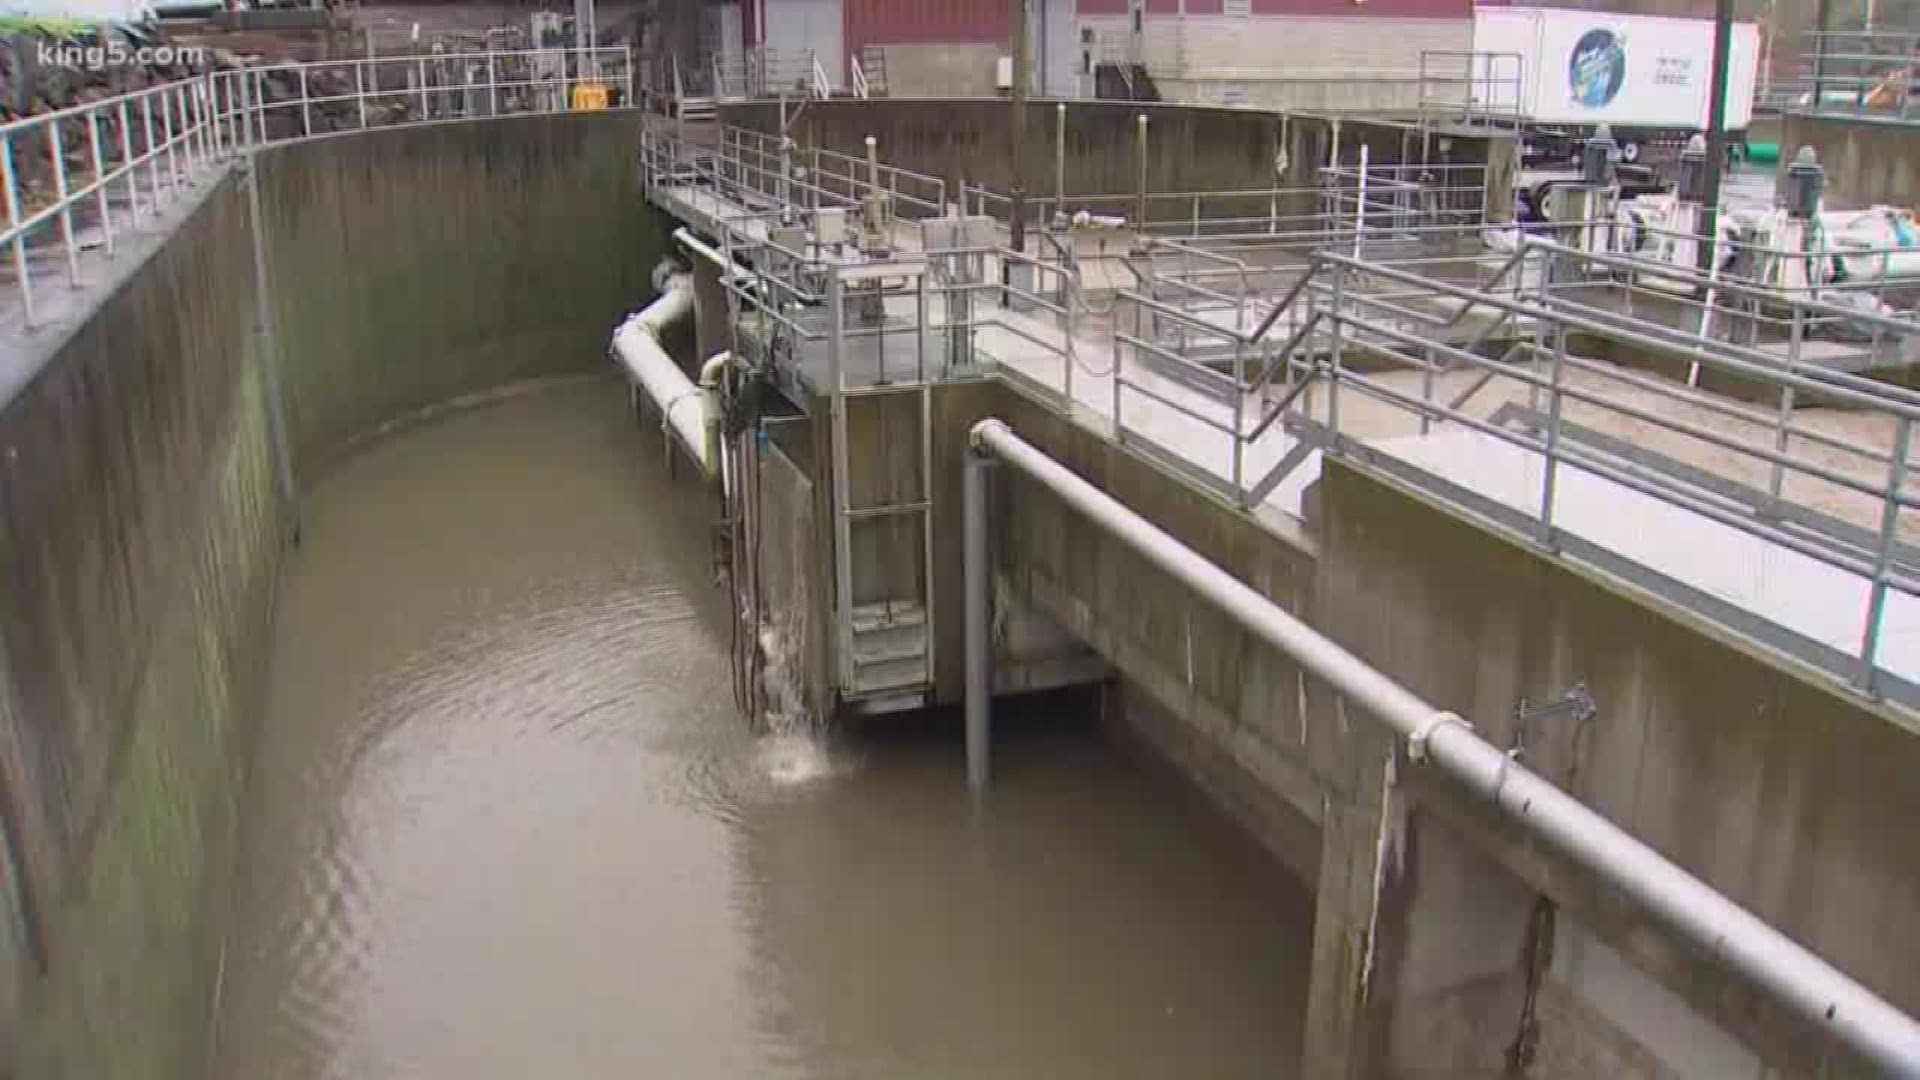 The city of Duvall's wastewater treatment plant began processing more than 2 million gallons of water due to heavy rain and flooding.